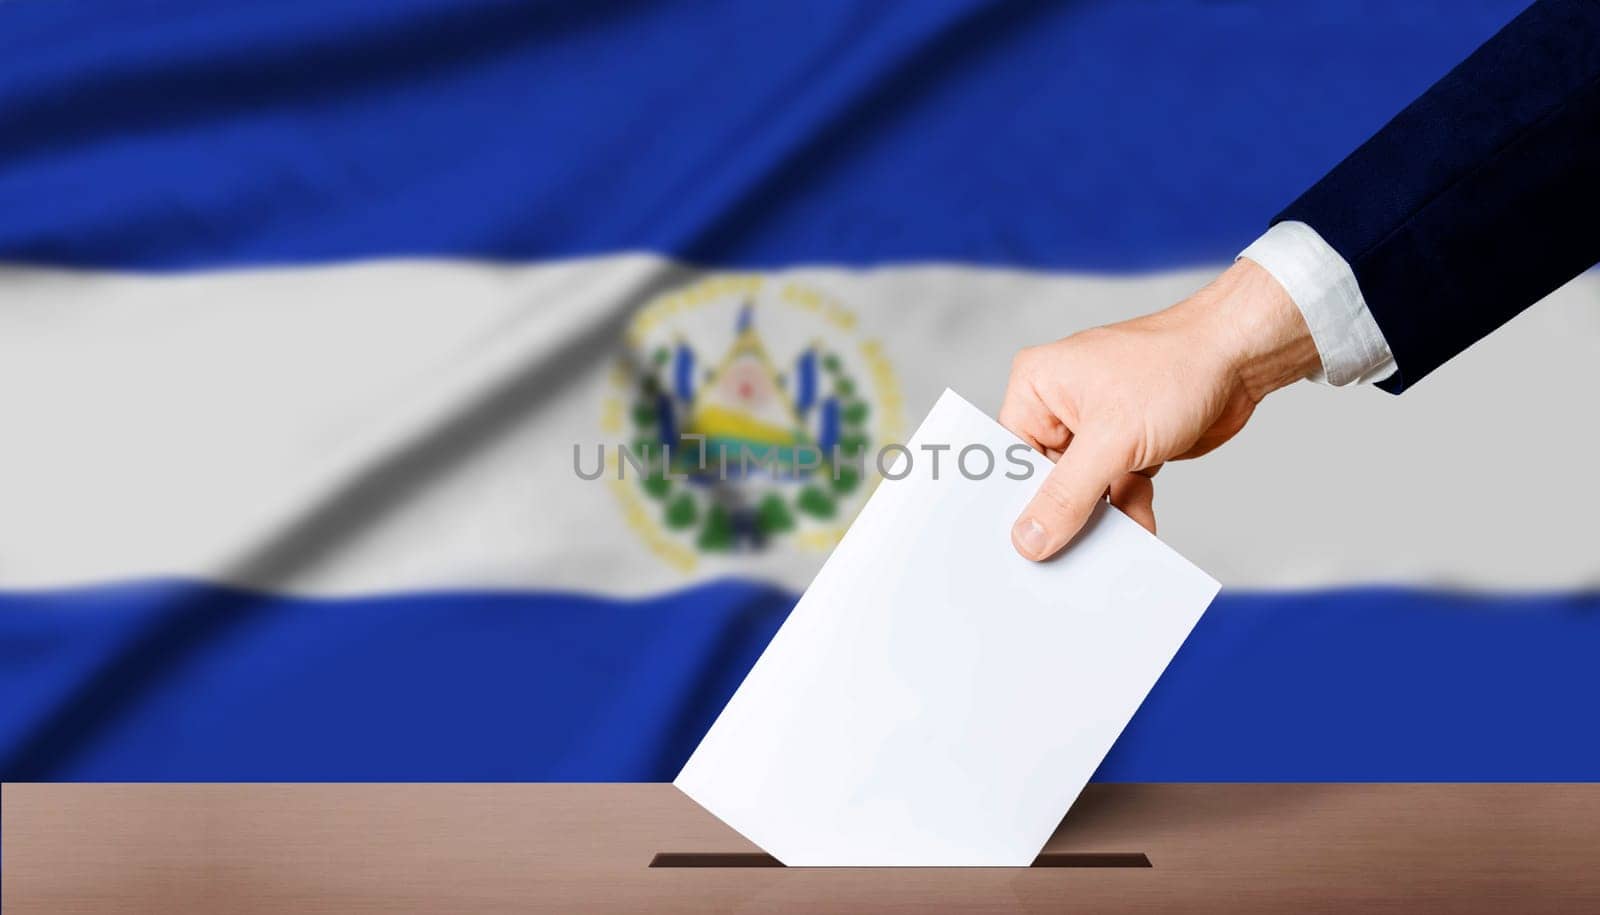 Hand holding ballot in voting ballot box with El Salvador flag in background. El Salvador presidential elections concept